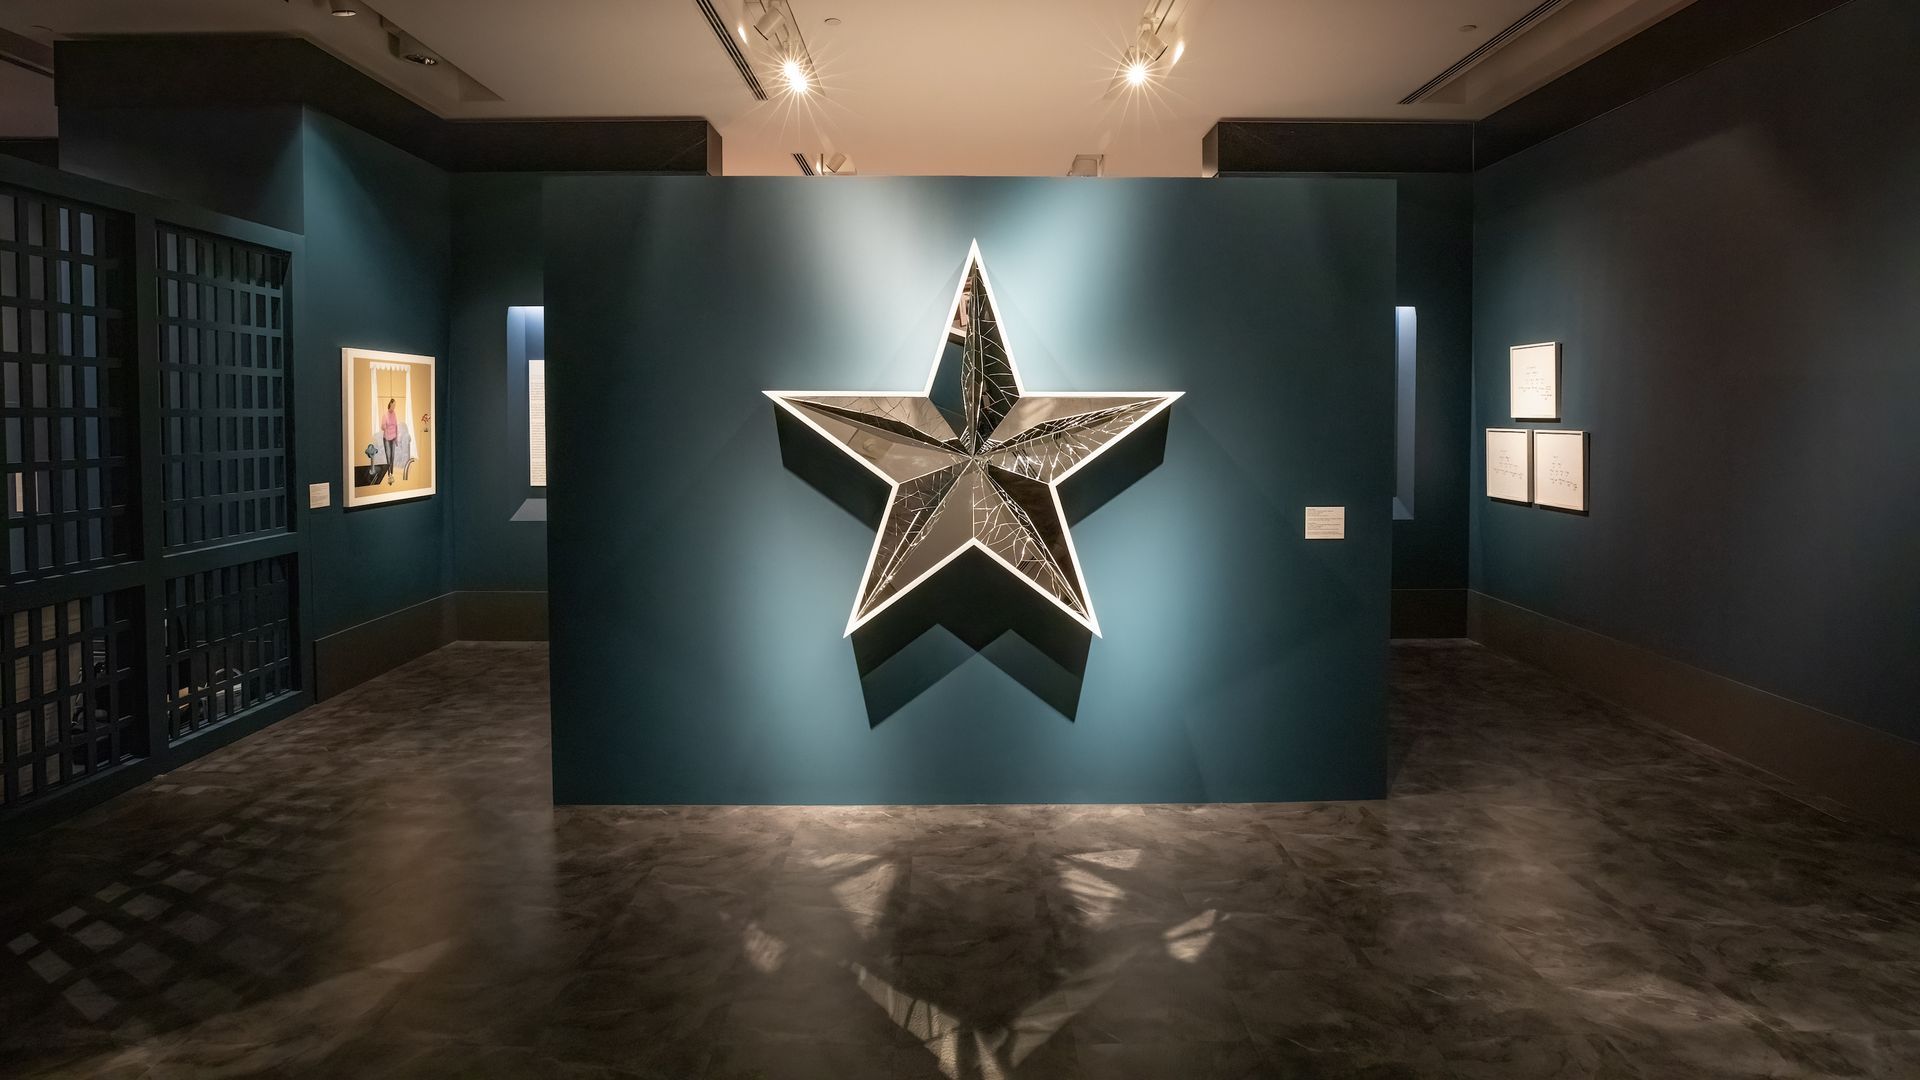 A silver star-shaped artwork hangs on a teal blue wall in a gallery.